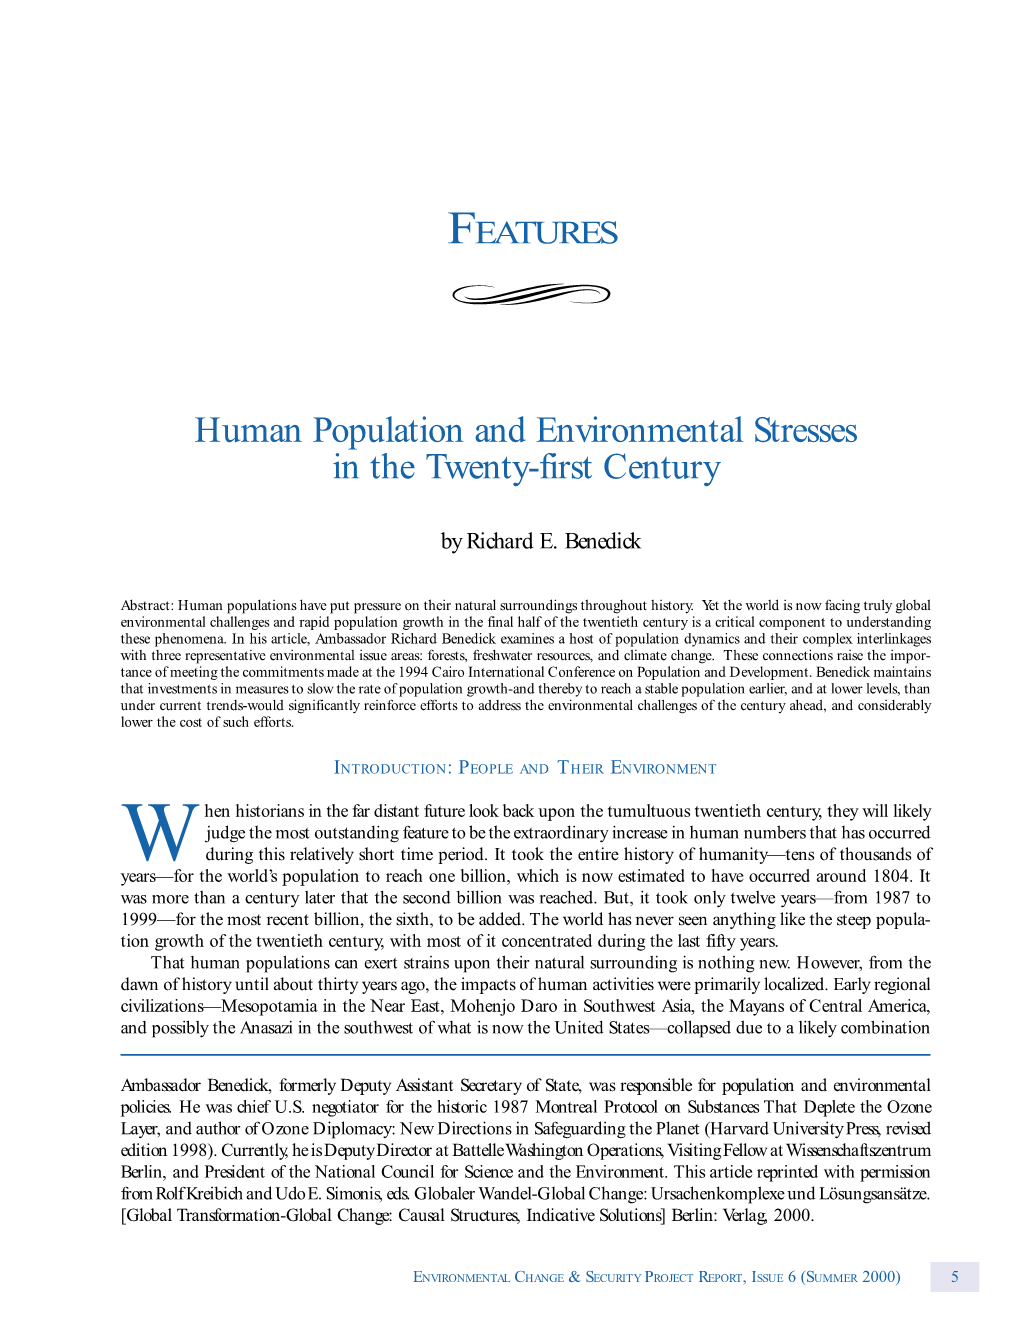 Human Population and Environmental Stresses in the Twenty-First Century